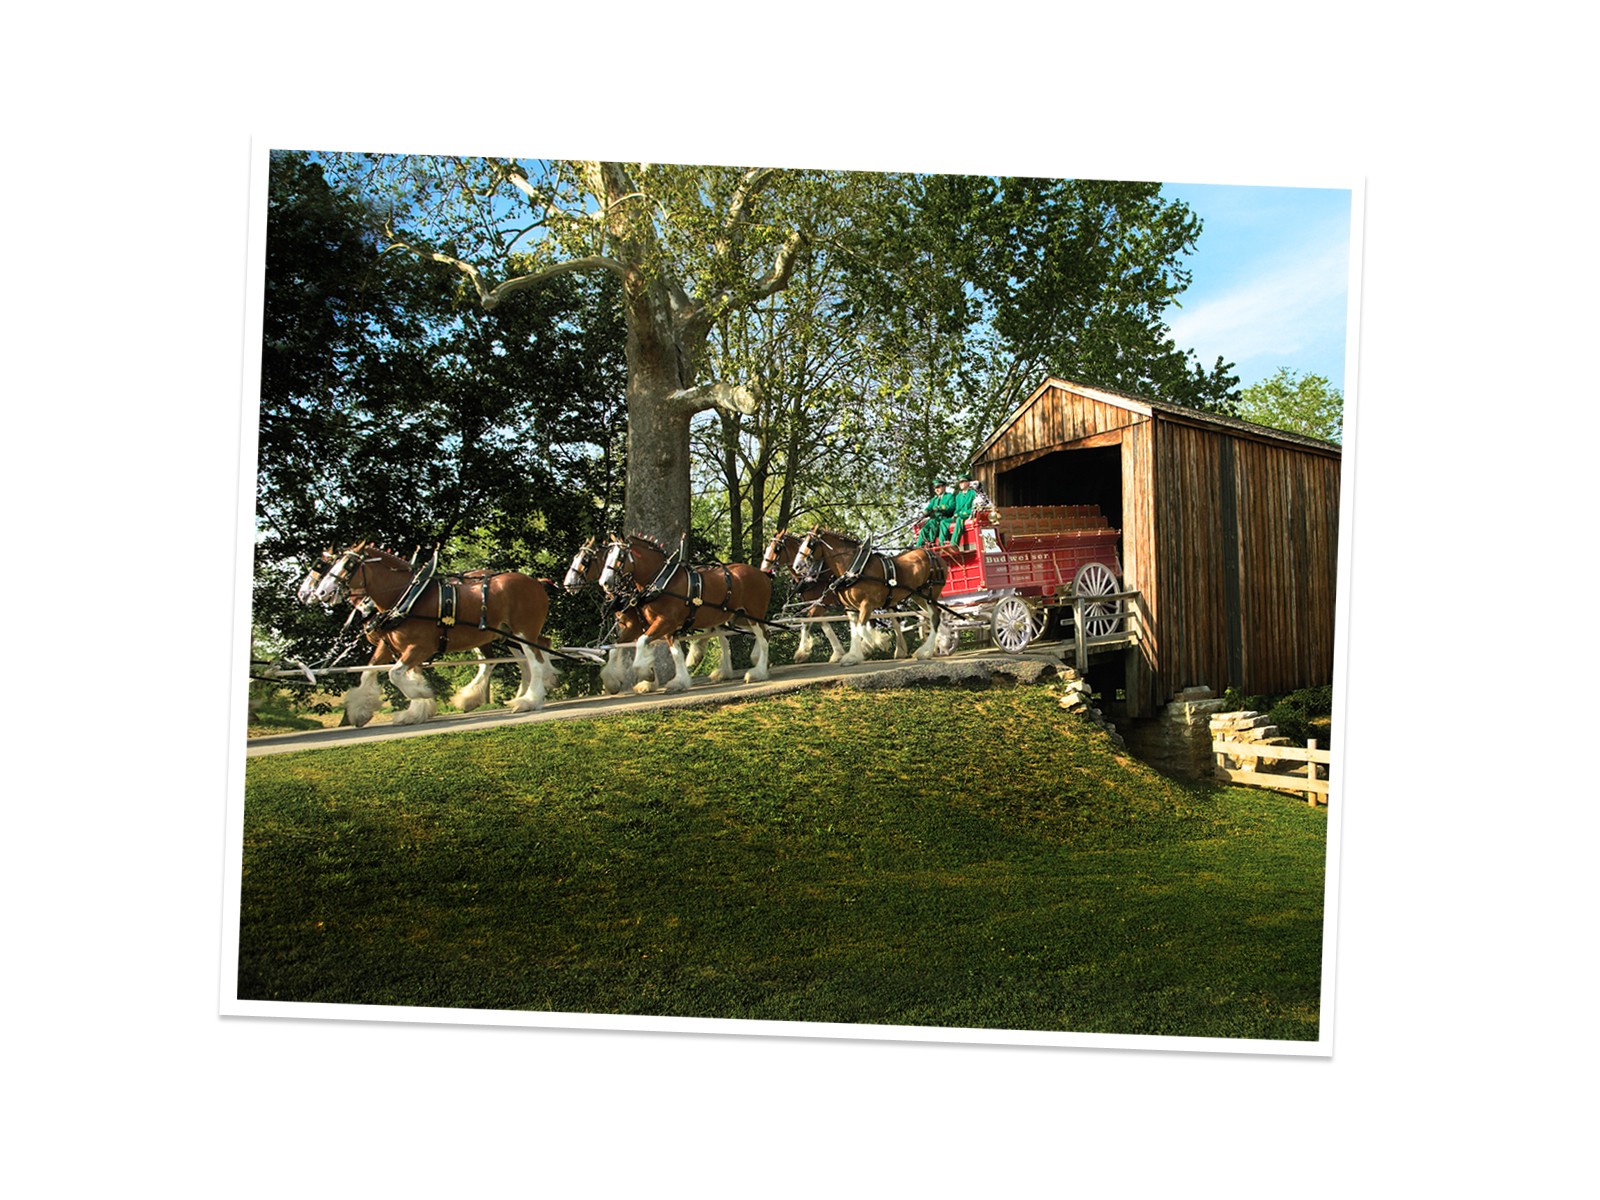 Budweiser Clydesdales Carriage 1600x1200 STANDARD Image Brands Ads